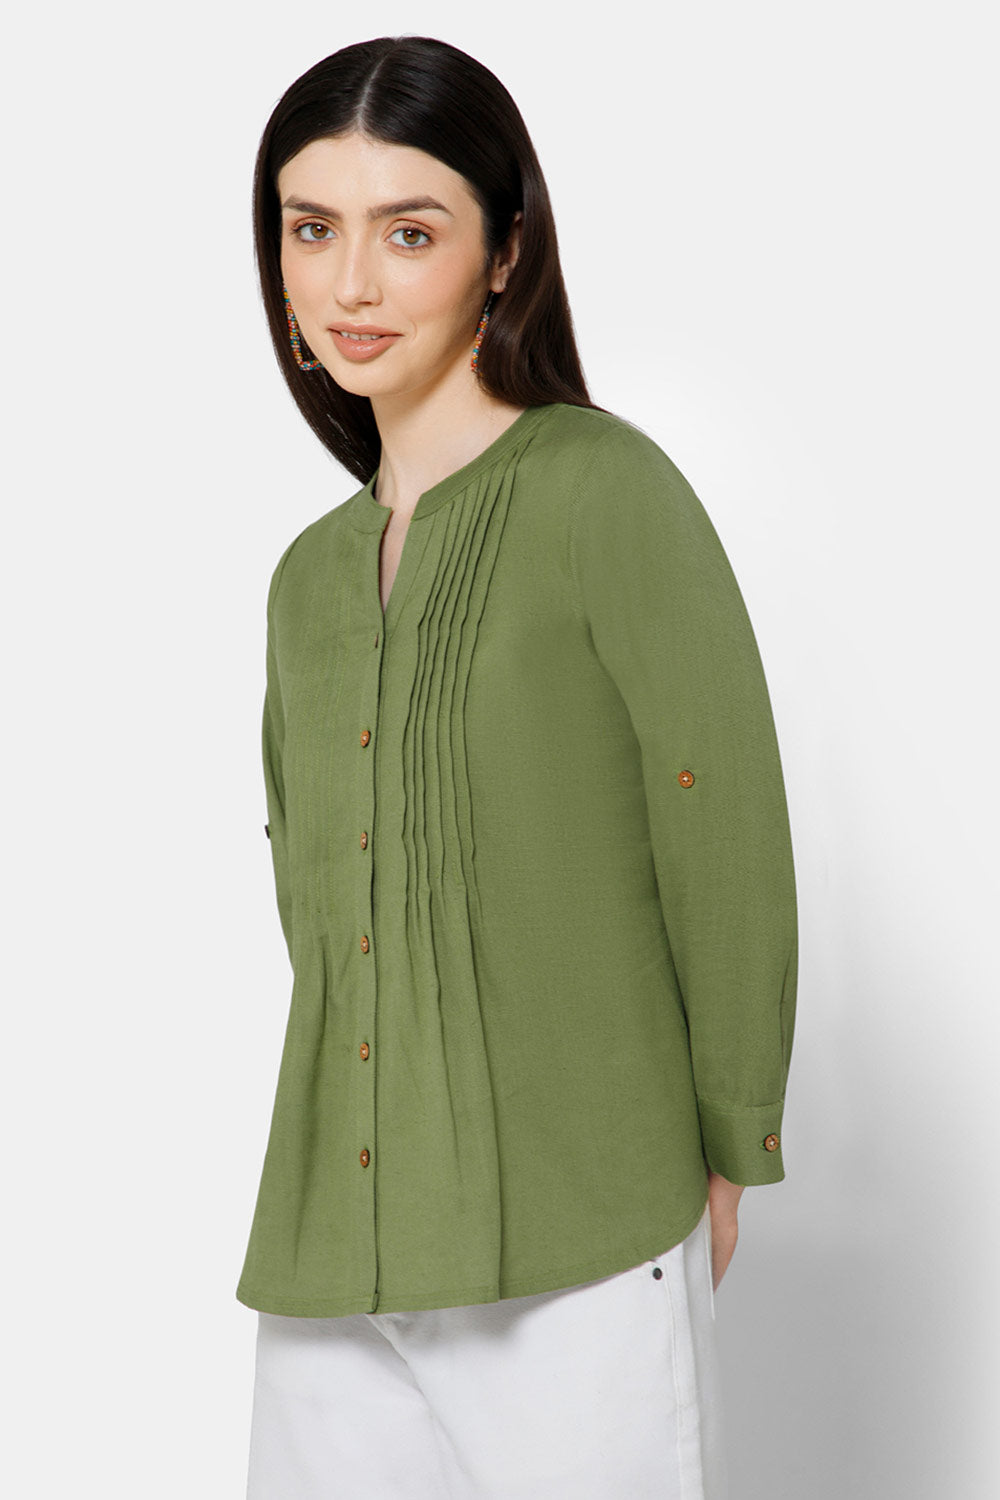 Mythri Women's Regular Casual top - Green - TO20